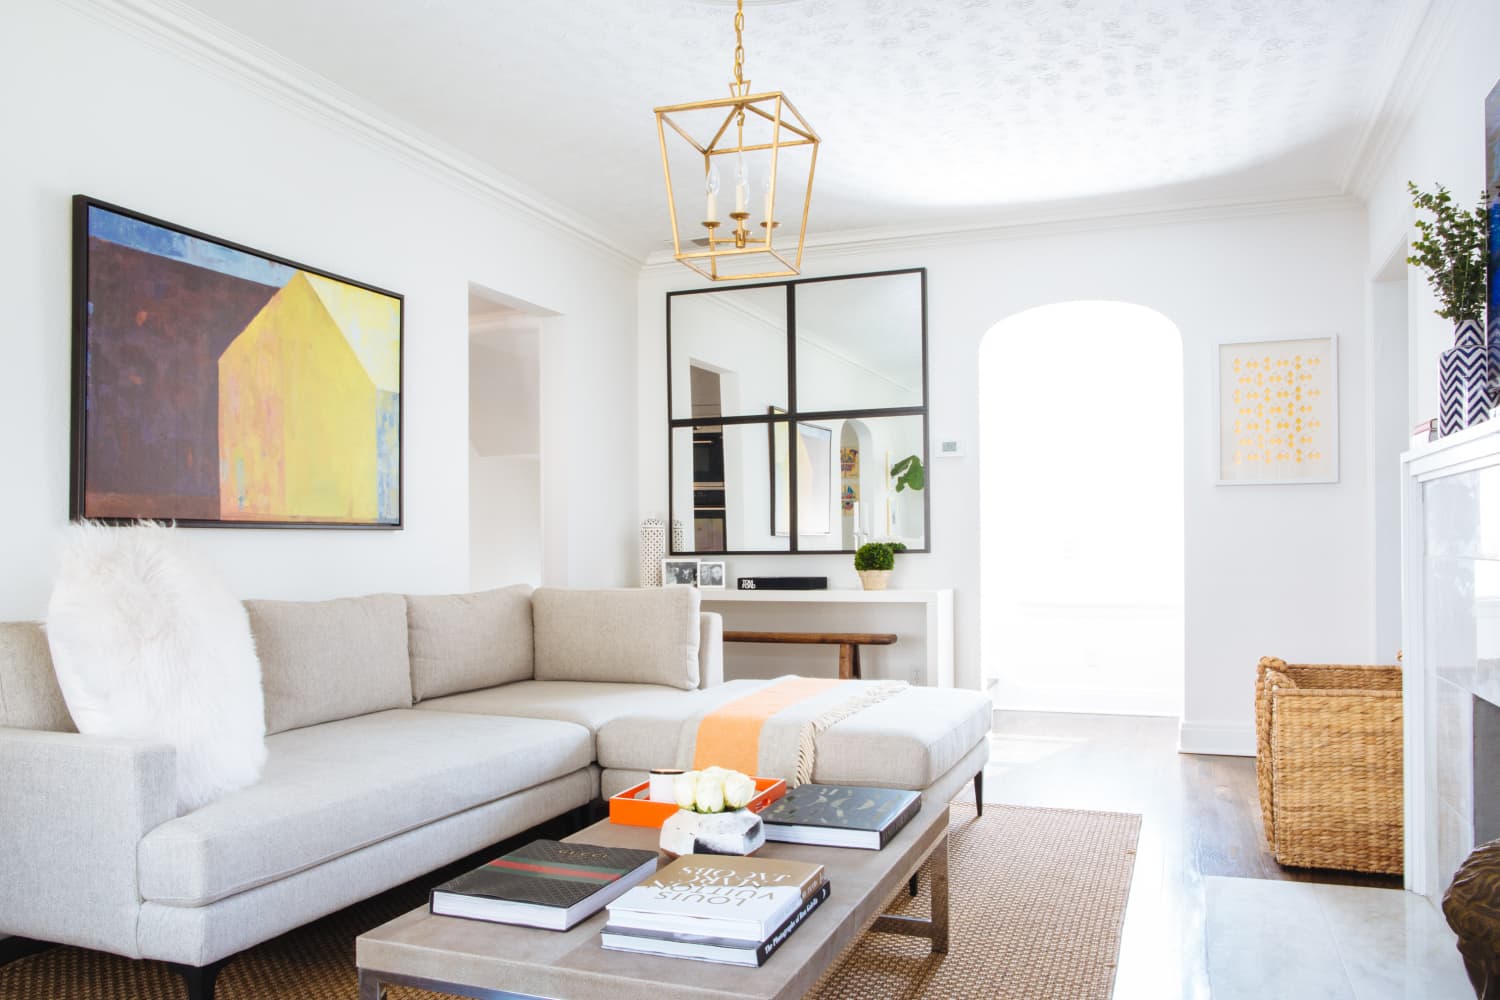 How to Get a High-End Living Room Look on a Real-Life Budget